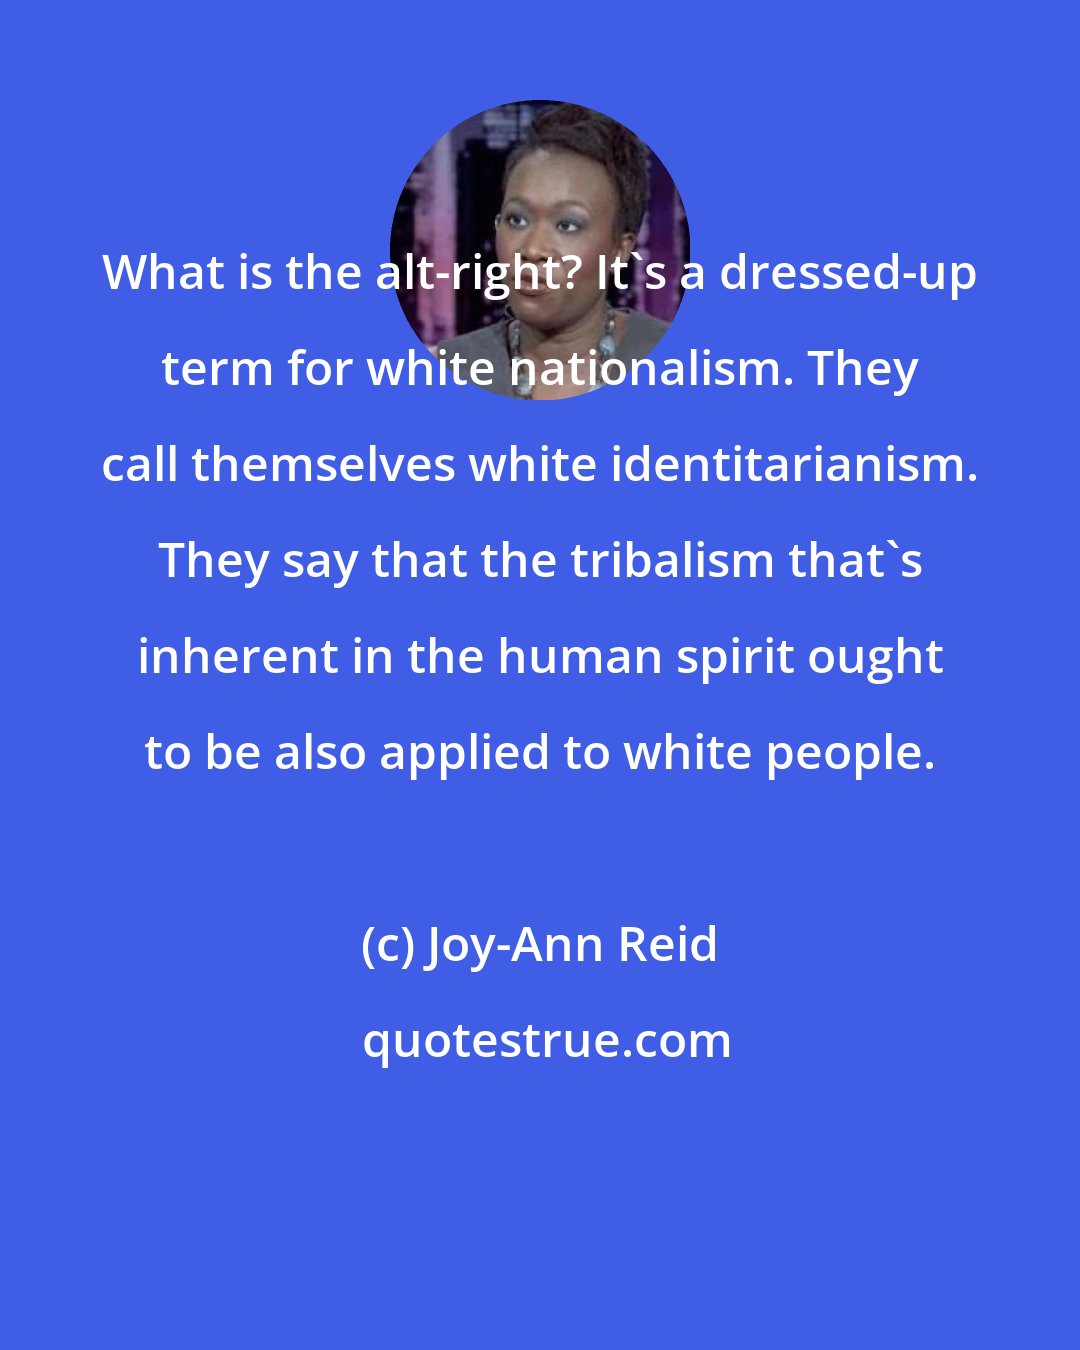 Joy-Ann Reid: What is the alt-right? It's a dressed-up term for white nationalism. They call themselves white identitarianism. They say that the tribalism that's inherent in the human spirit ought to be also applied to white people.